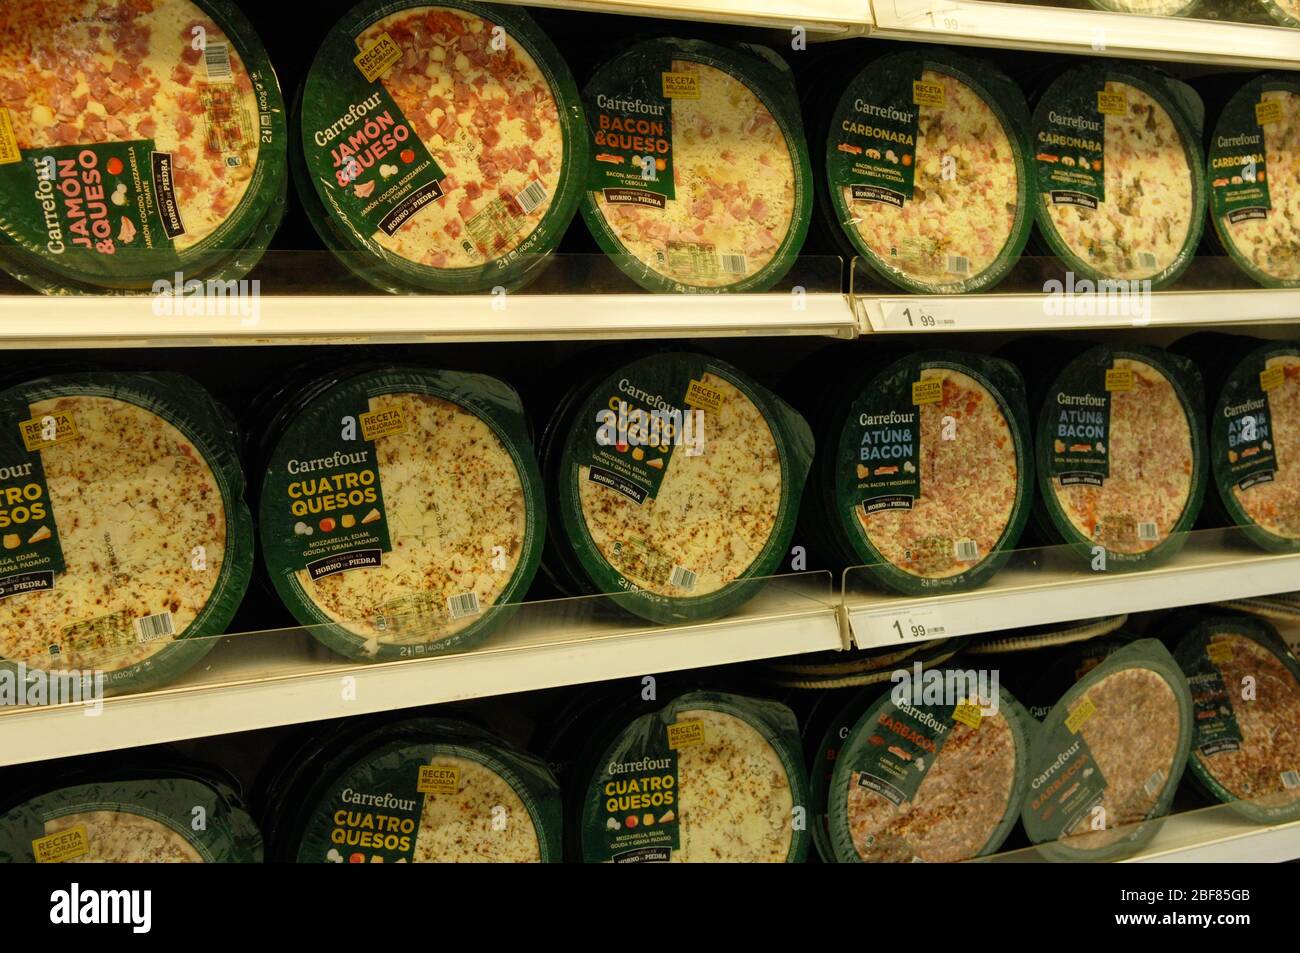 Carrefour refrigerated pizza Stock Photo - Alamy